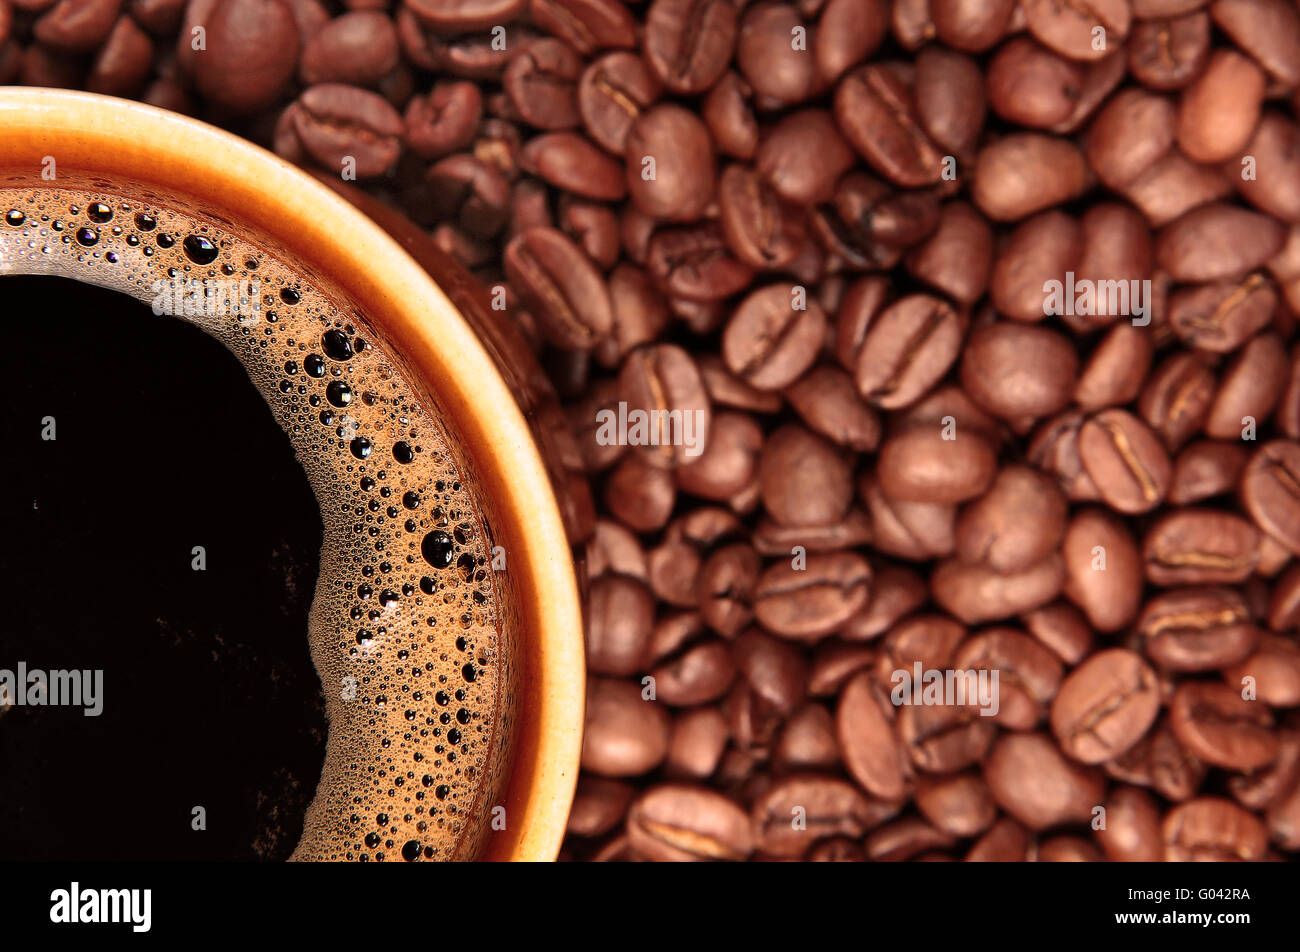 Coffee cup and beans, Stock Photo